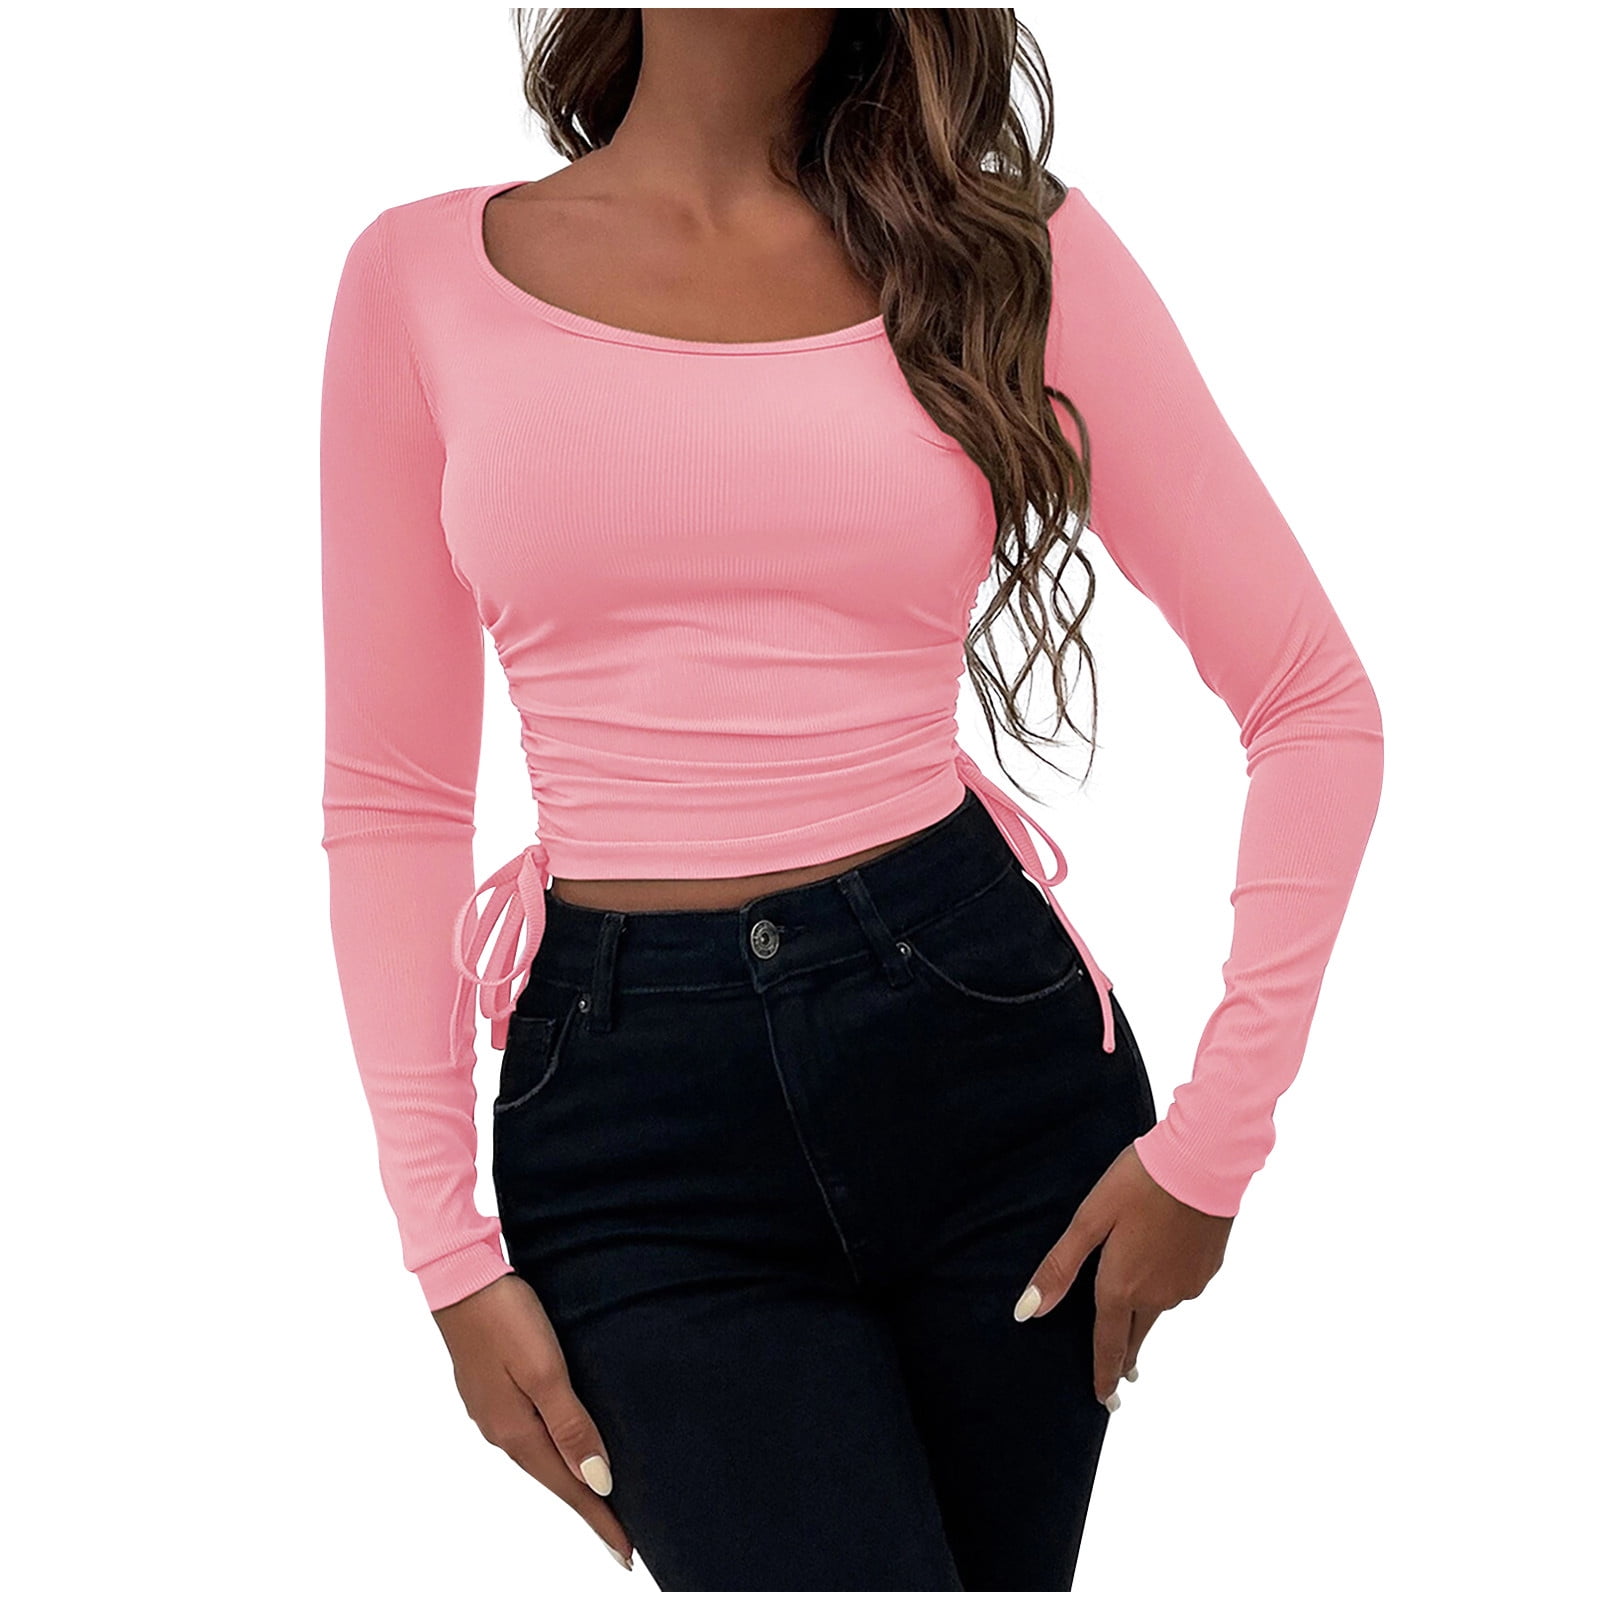 XFLWAM Women Drawstring Side Ruched Crop Top Tee Shirt Ribbed Knit Crew  Neck Basic Long Sleeve T Shirt Blouse Pink M 